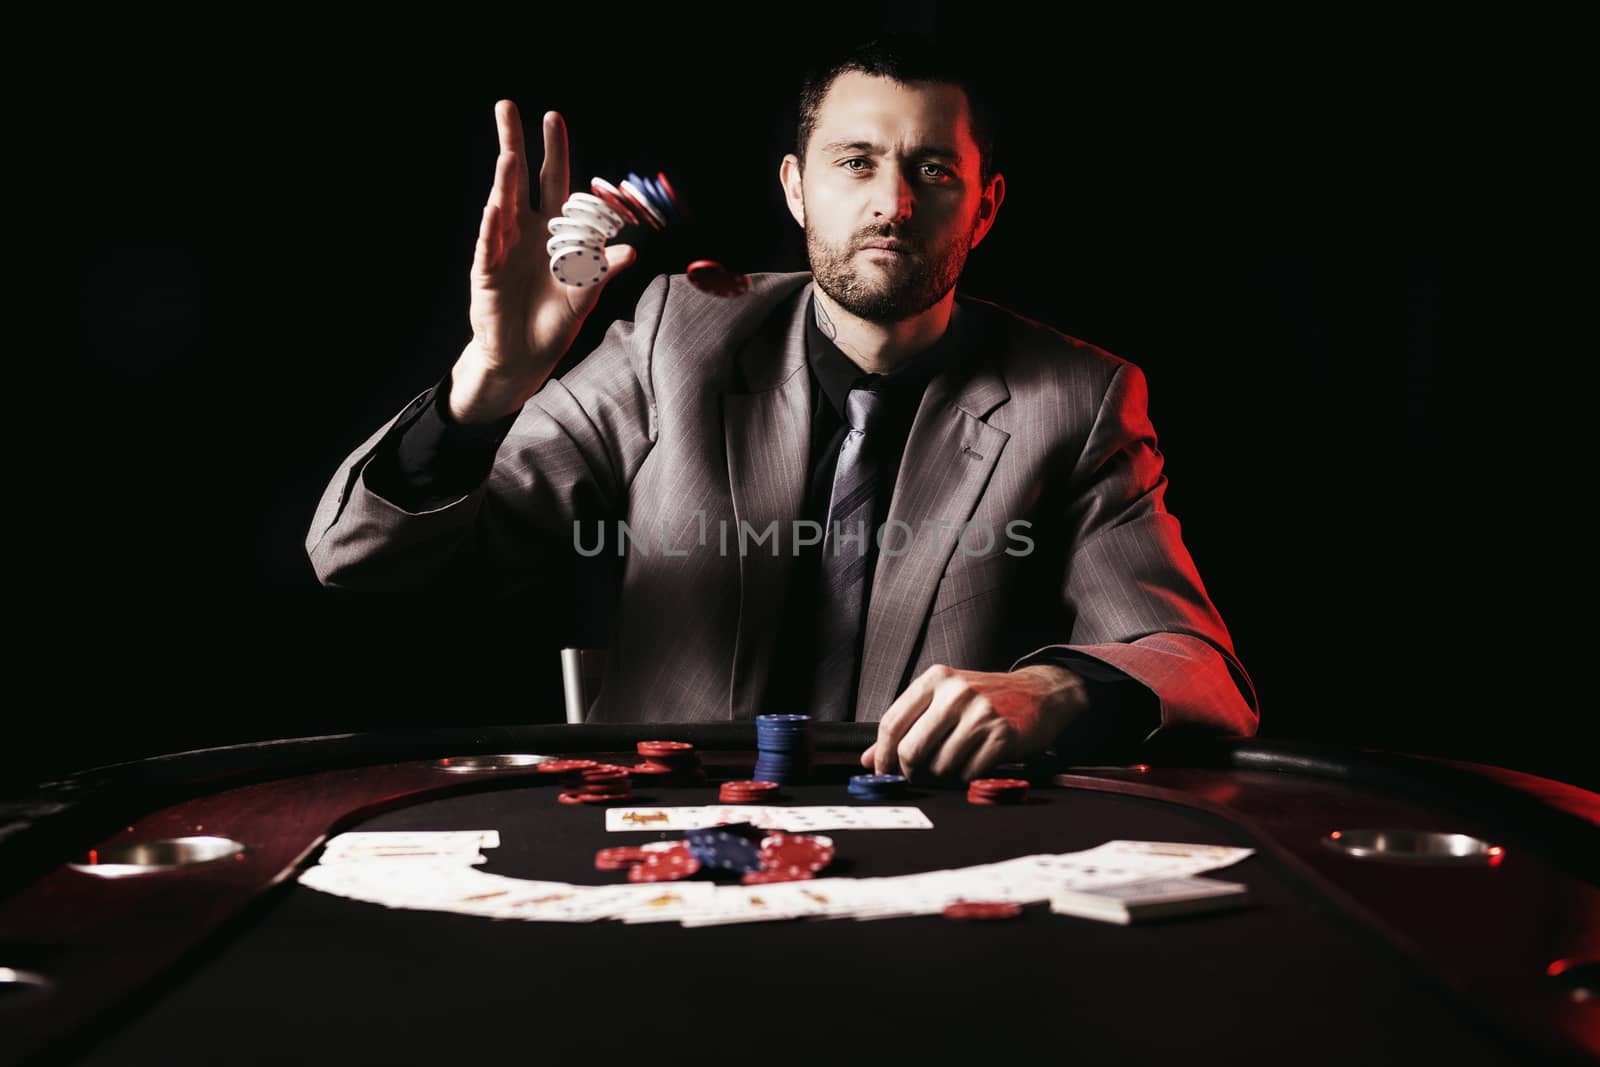 Concept: A high stakes poker player is frustrated and emotional over loosing and finding it hard to contain his emotions. Cinematic portrait.